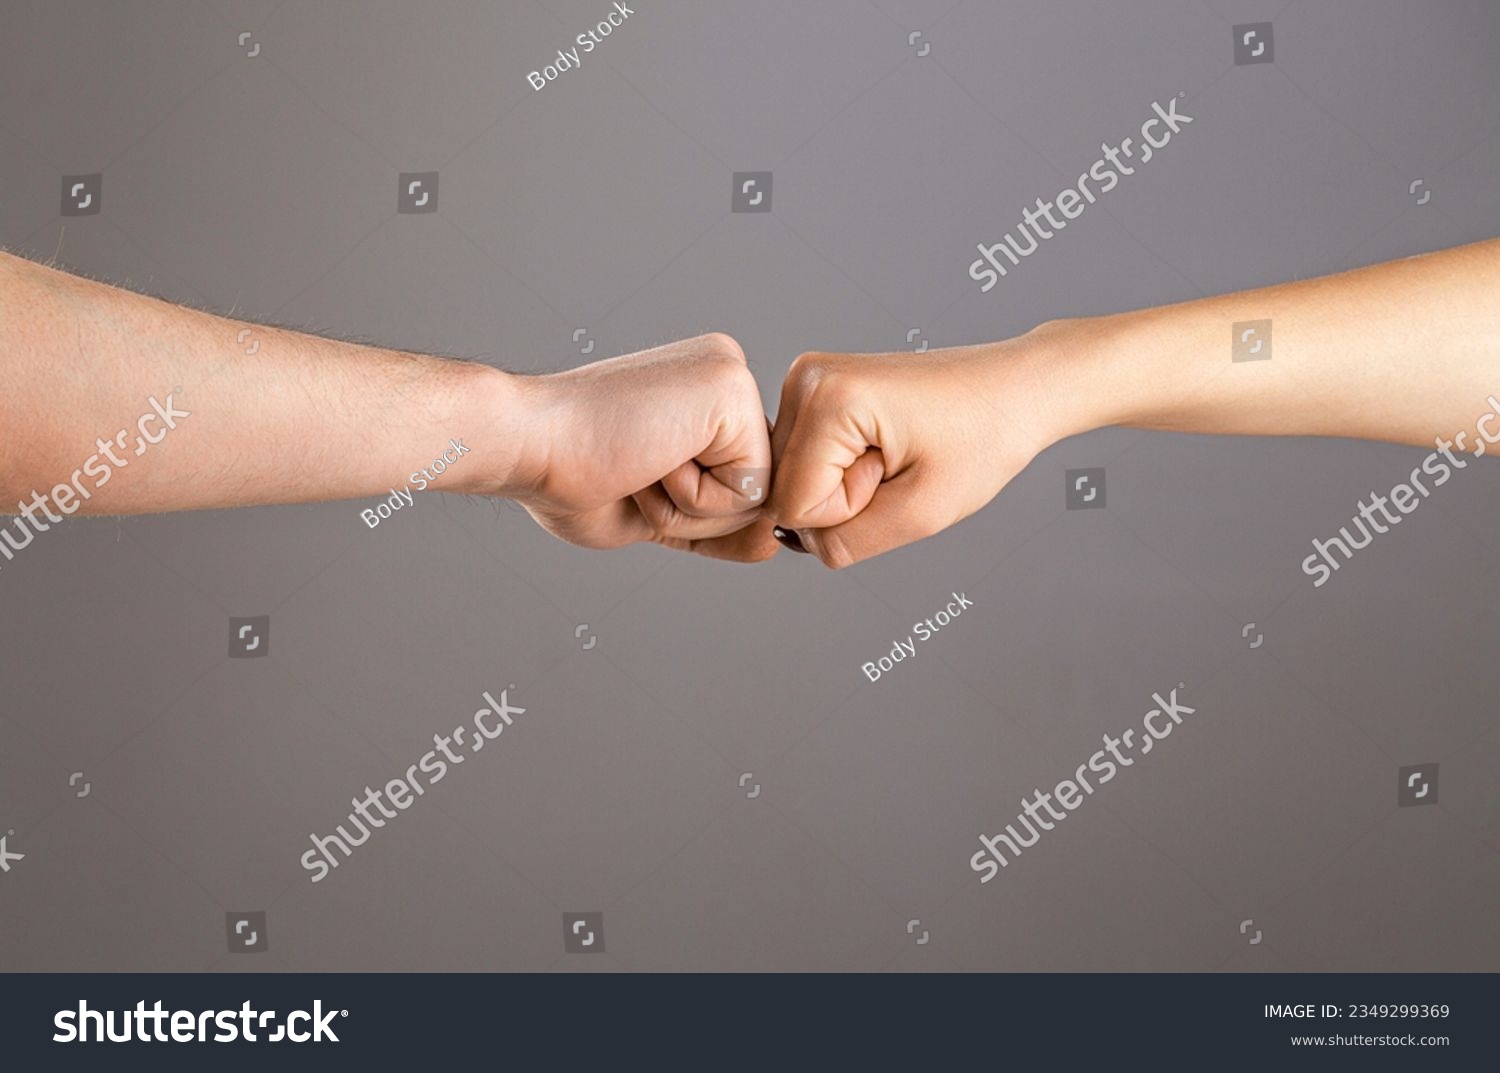 Man and woman are fist bumping. Fist Bump. Clash of two fists, vs. Gesture of giving respect or approval. Friends greeting. Teamwork and friendship. Partnership concept. Male vs female hand. #2349299369